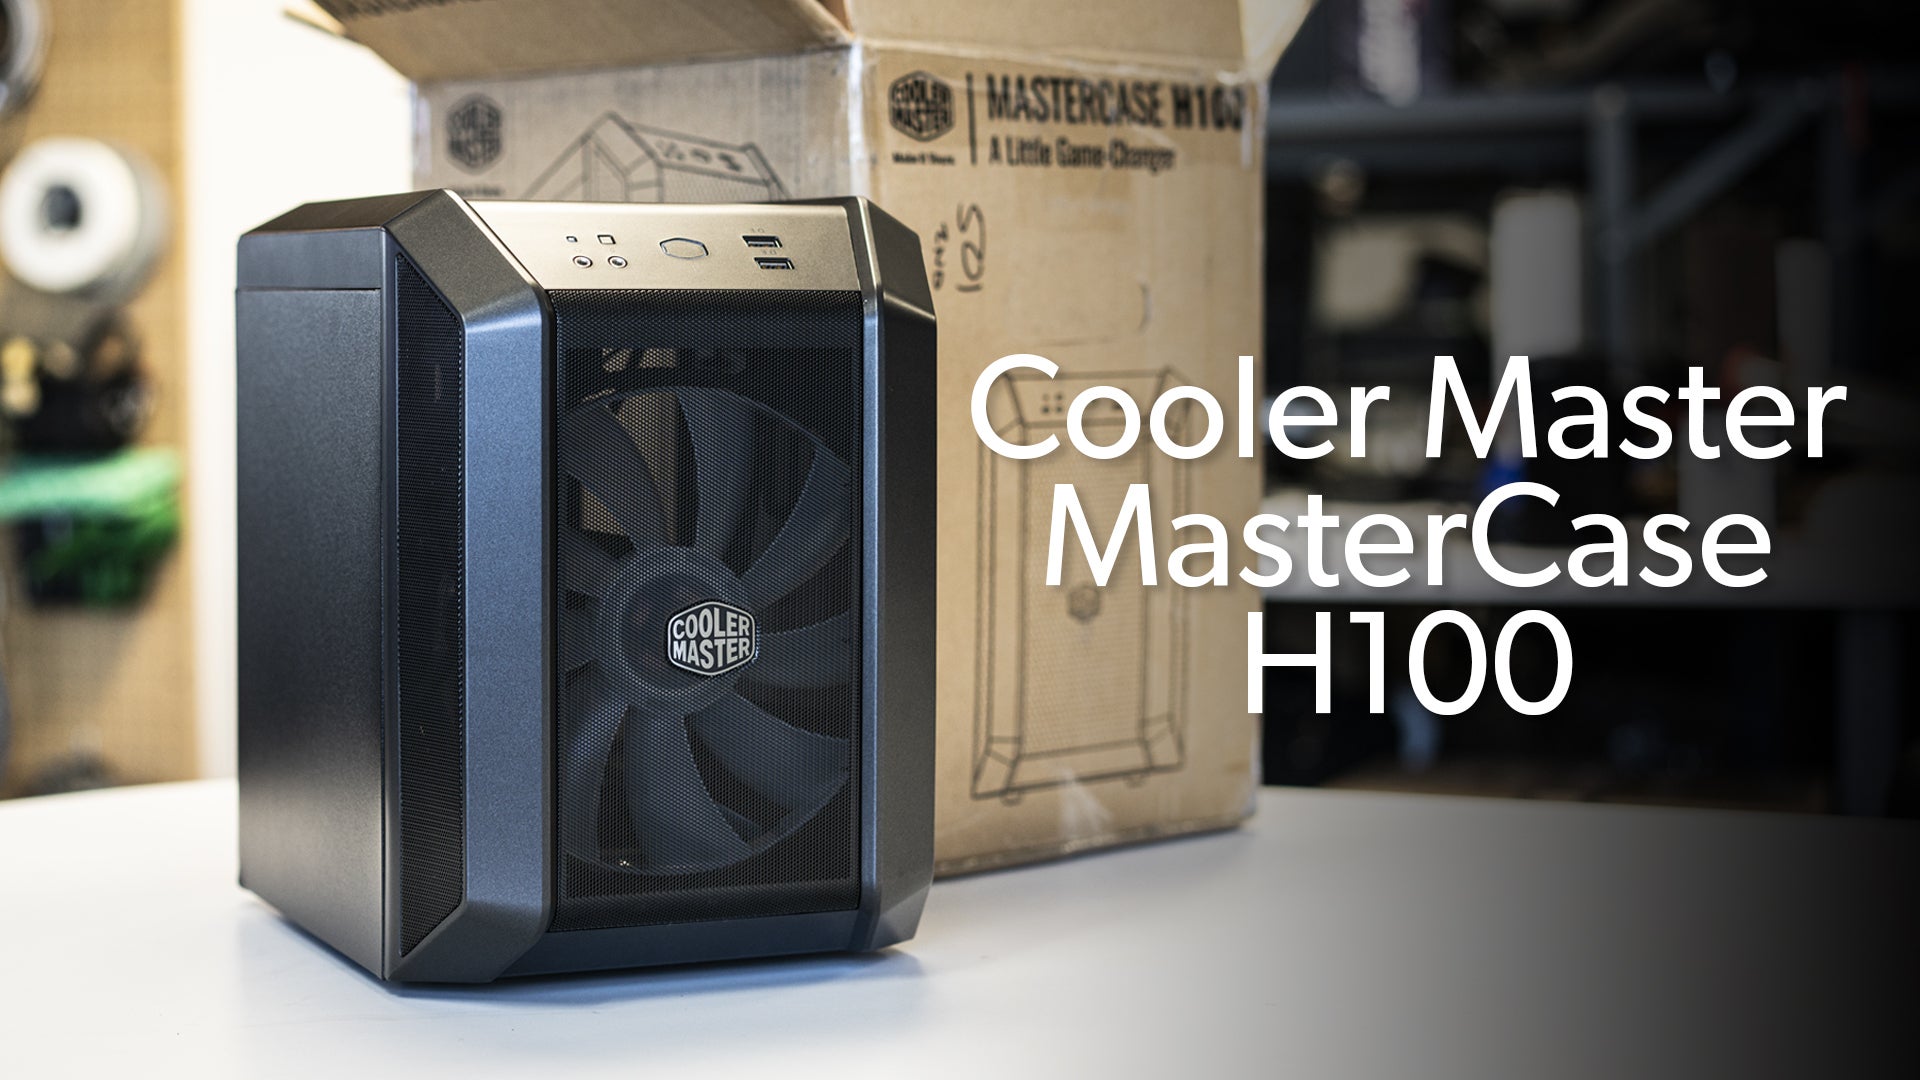 Take A Look Inside Cooler Master S Newest Mini Itx Case Pcworld